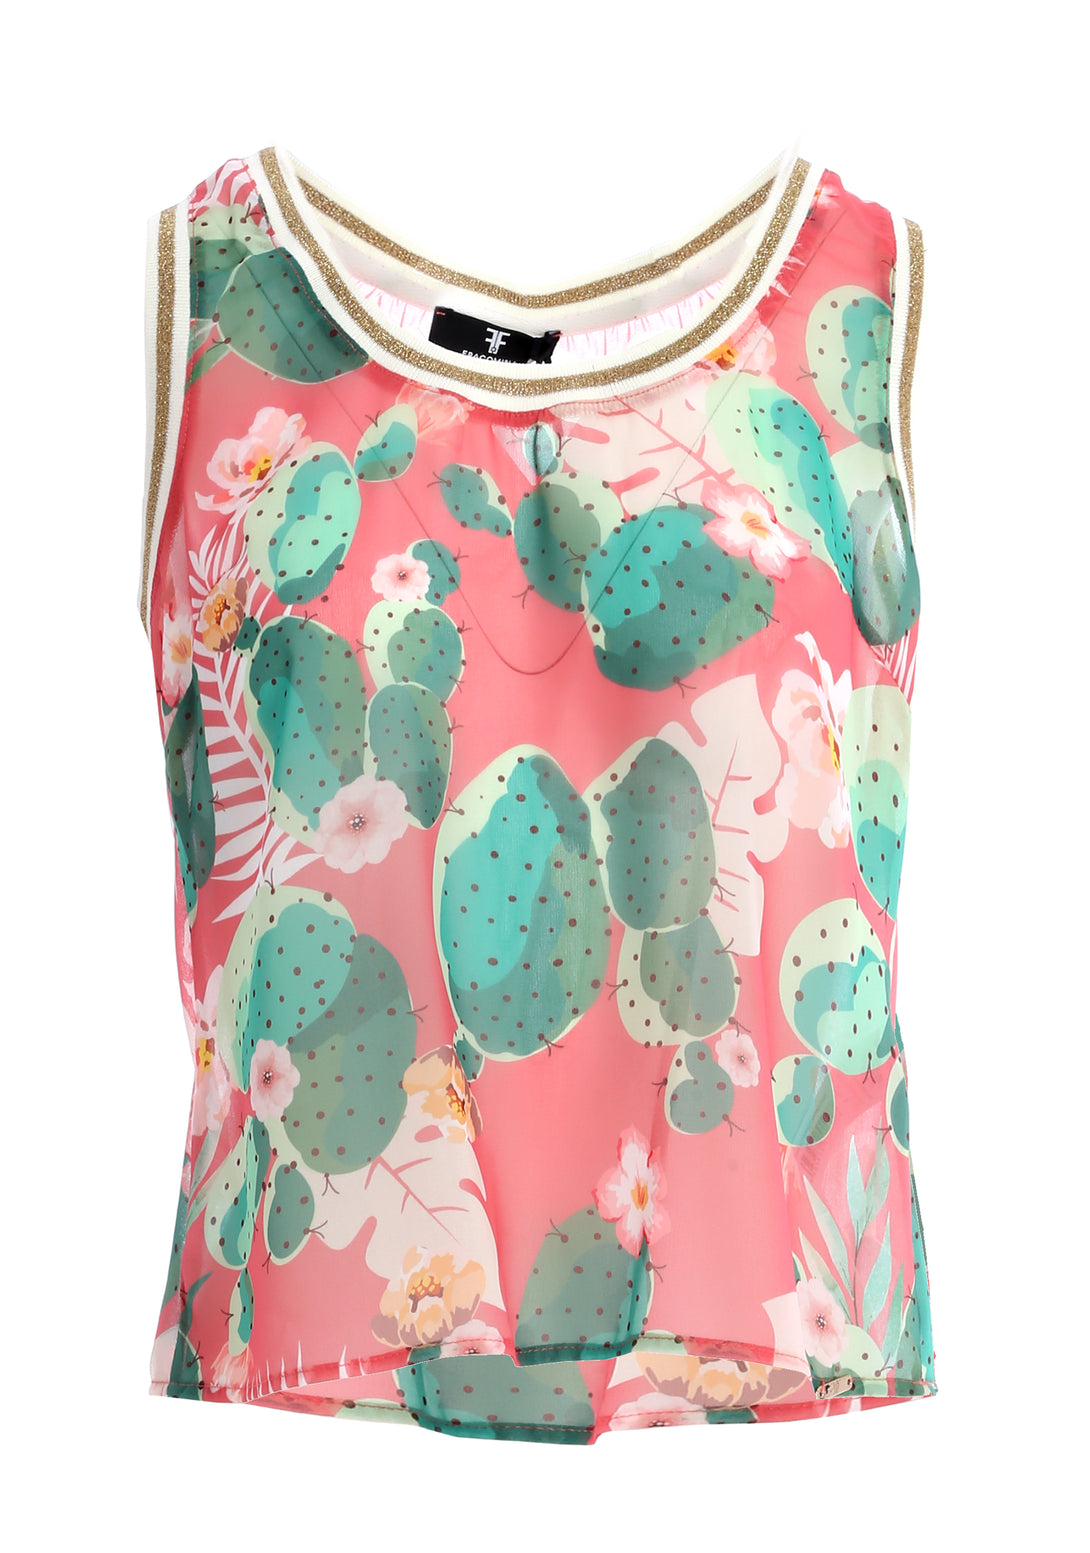 Tank top with flowery pattern